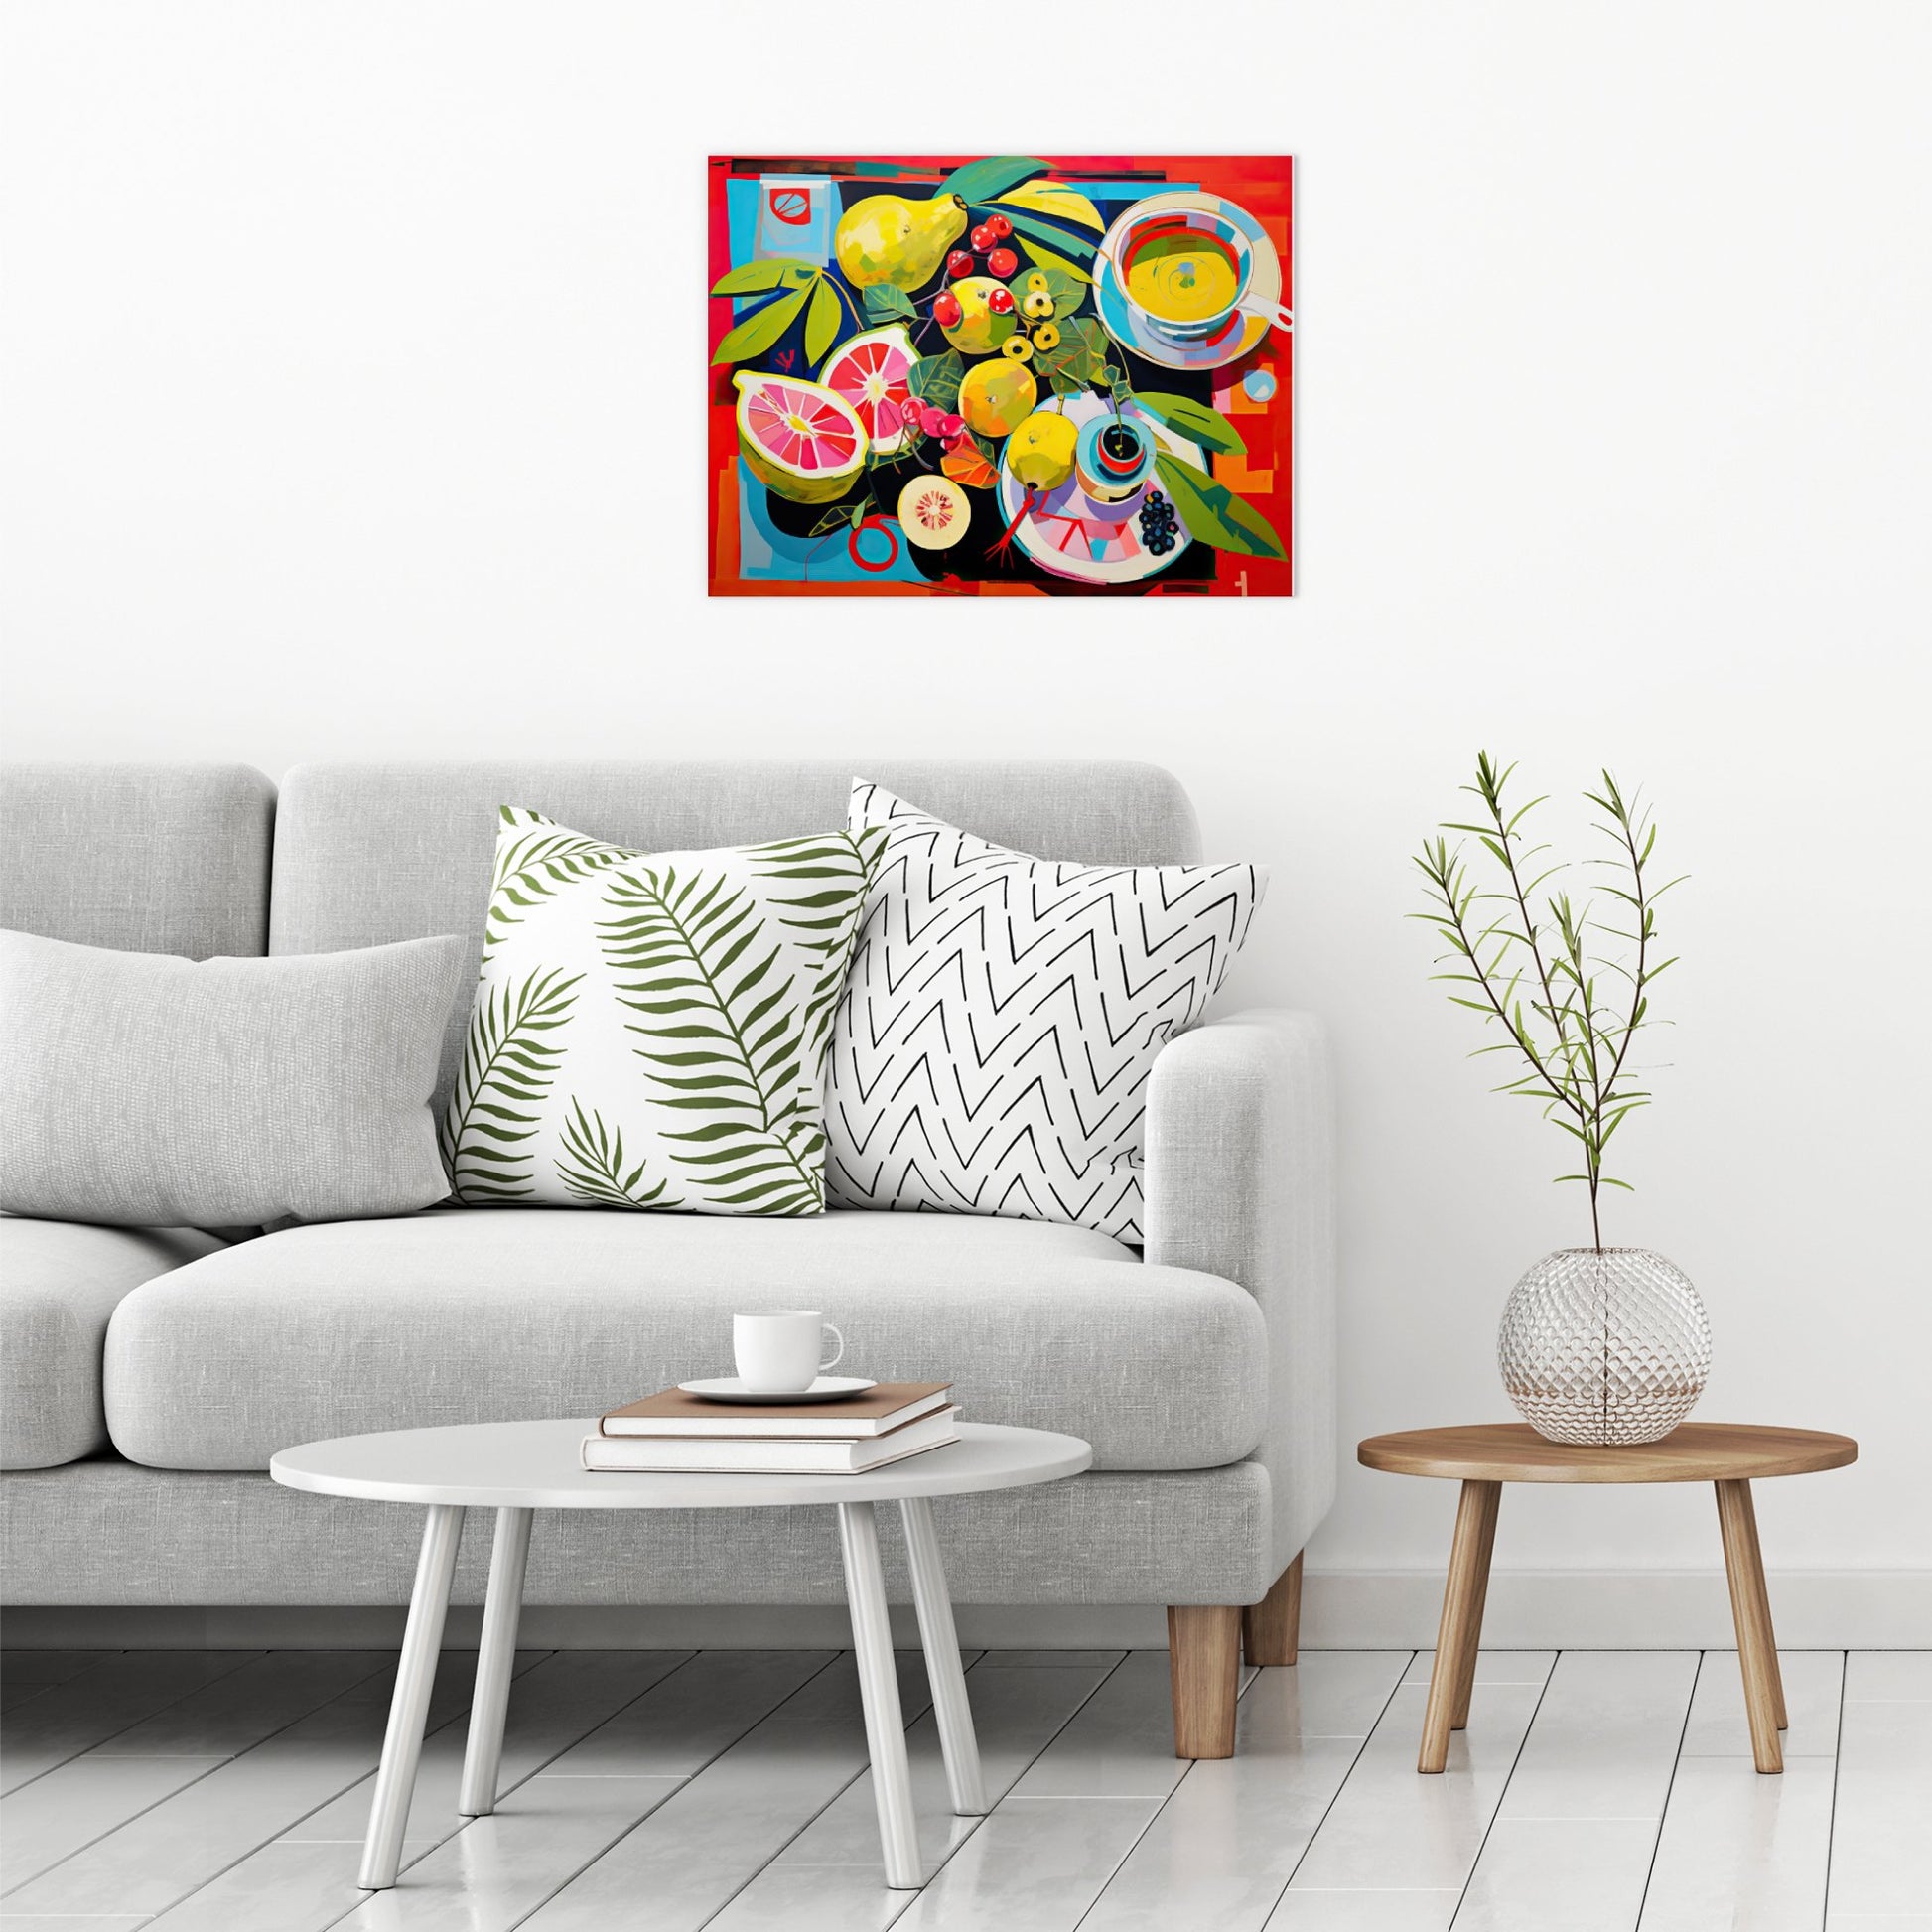 A contemporary modern room view showing a large size metal art poster display plate with printed design of a Still Life with Fruit Painting